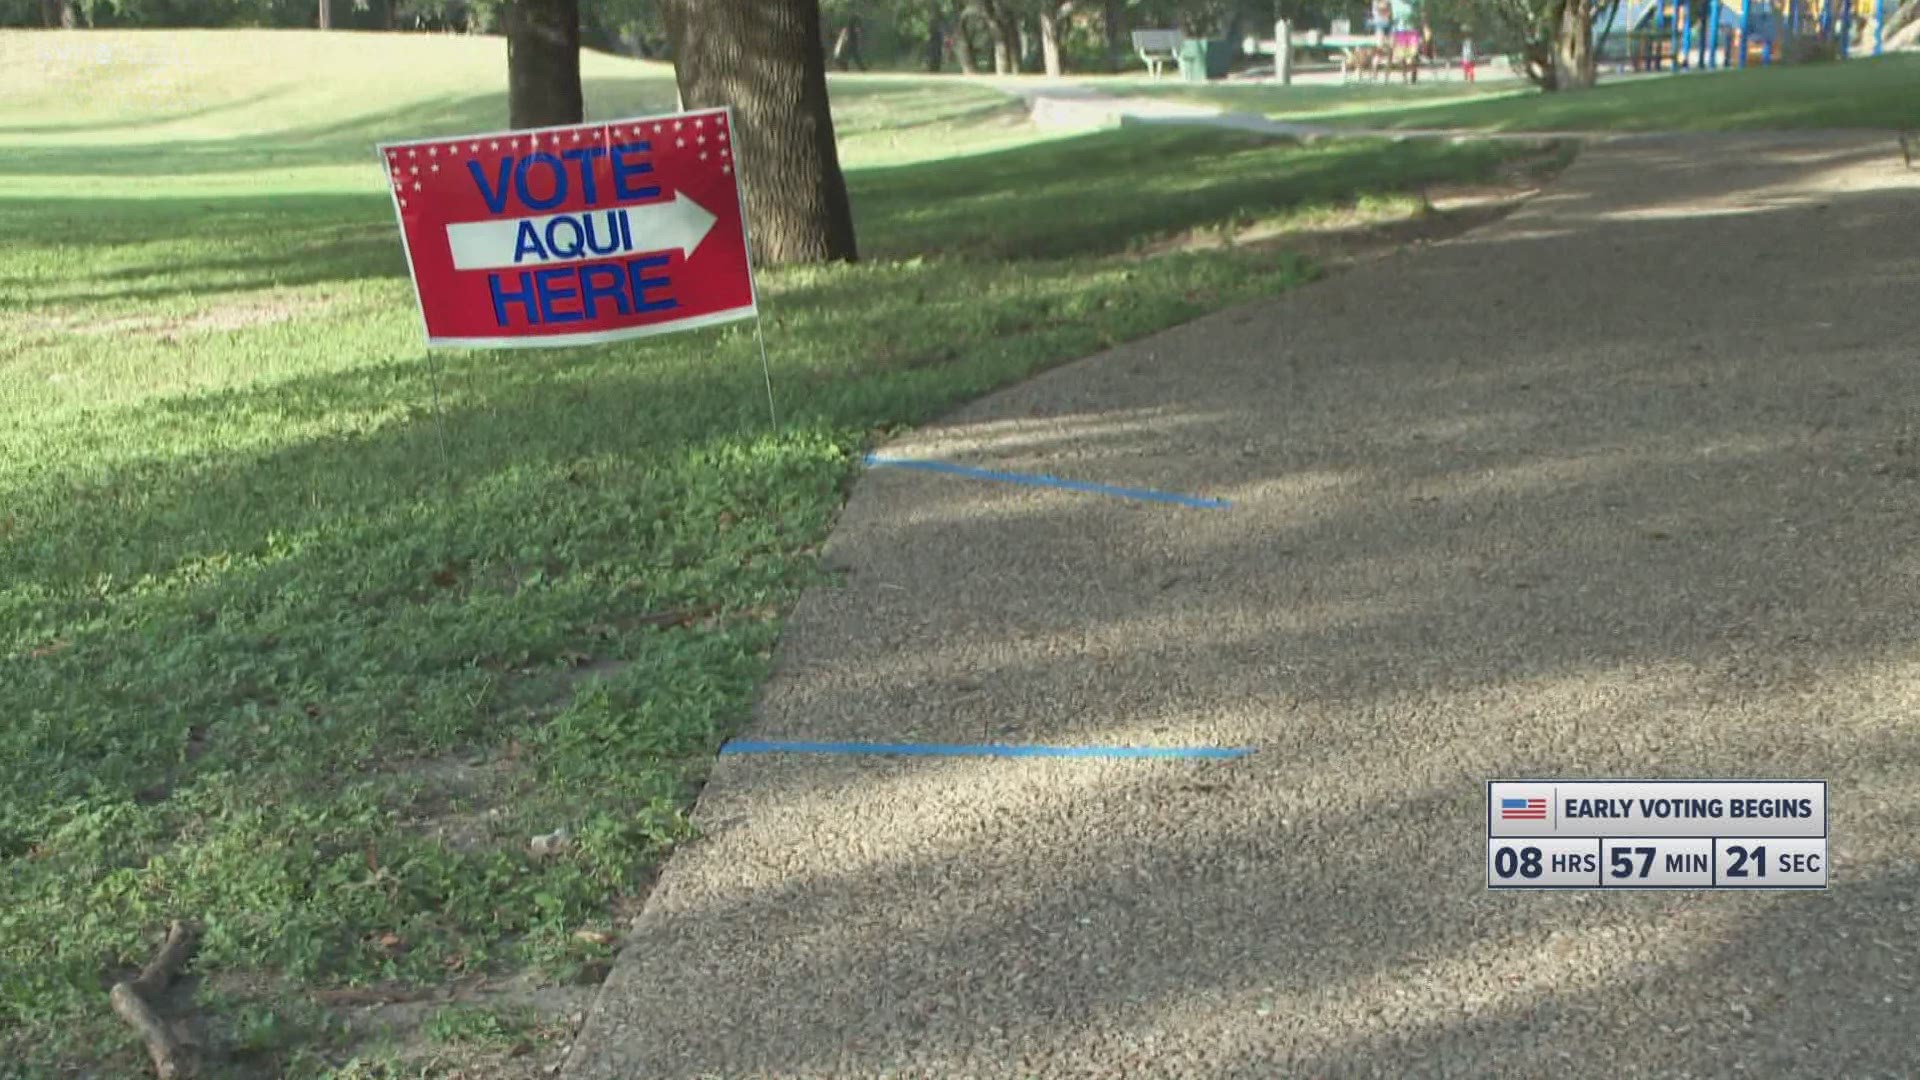 Early voting starts on Tuesday, Oct. 13, and Travis County election officials say they're ready for a big turnout.